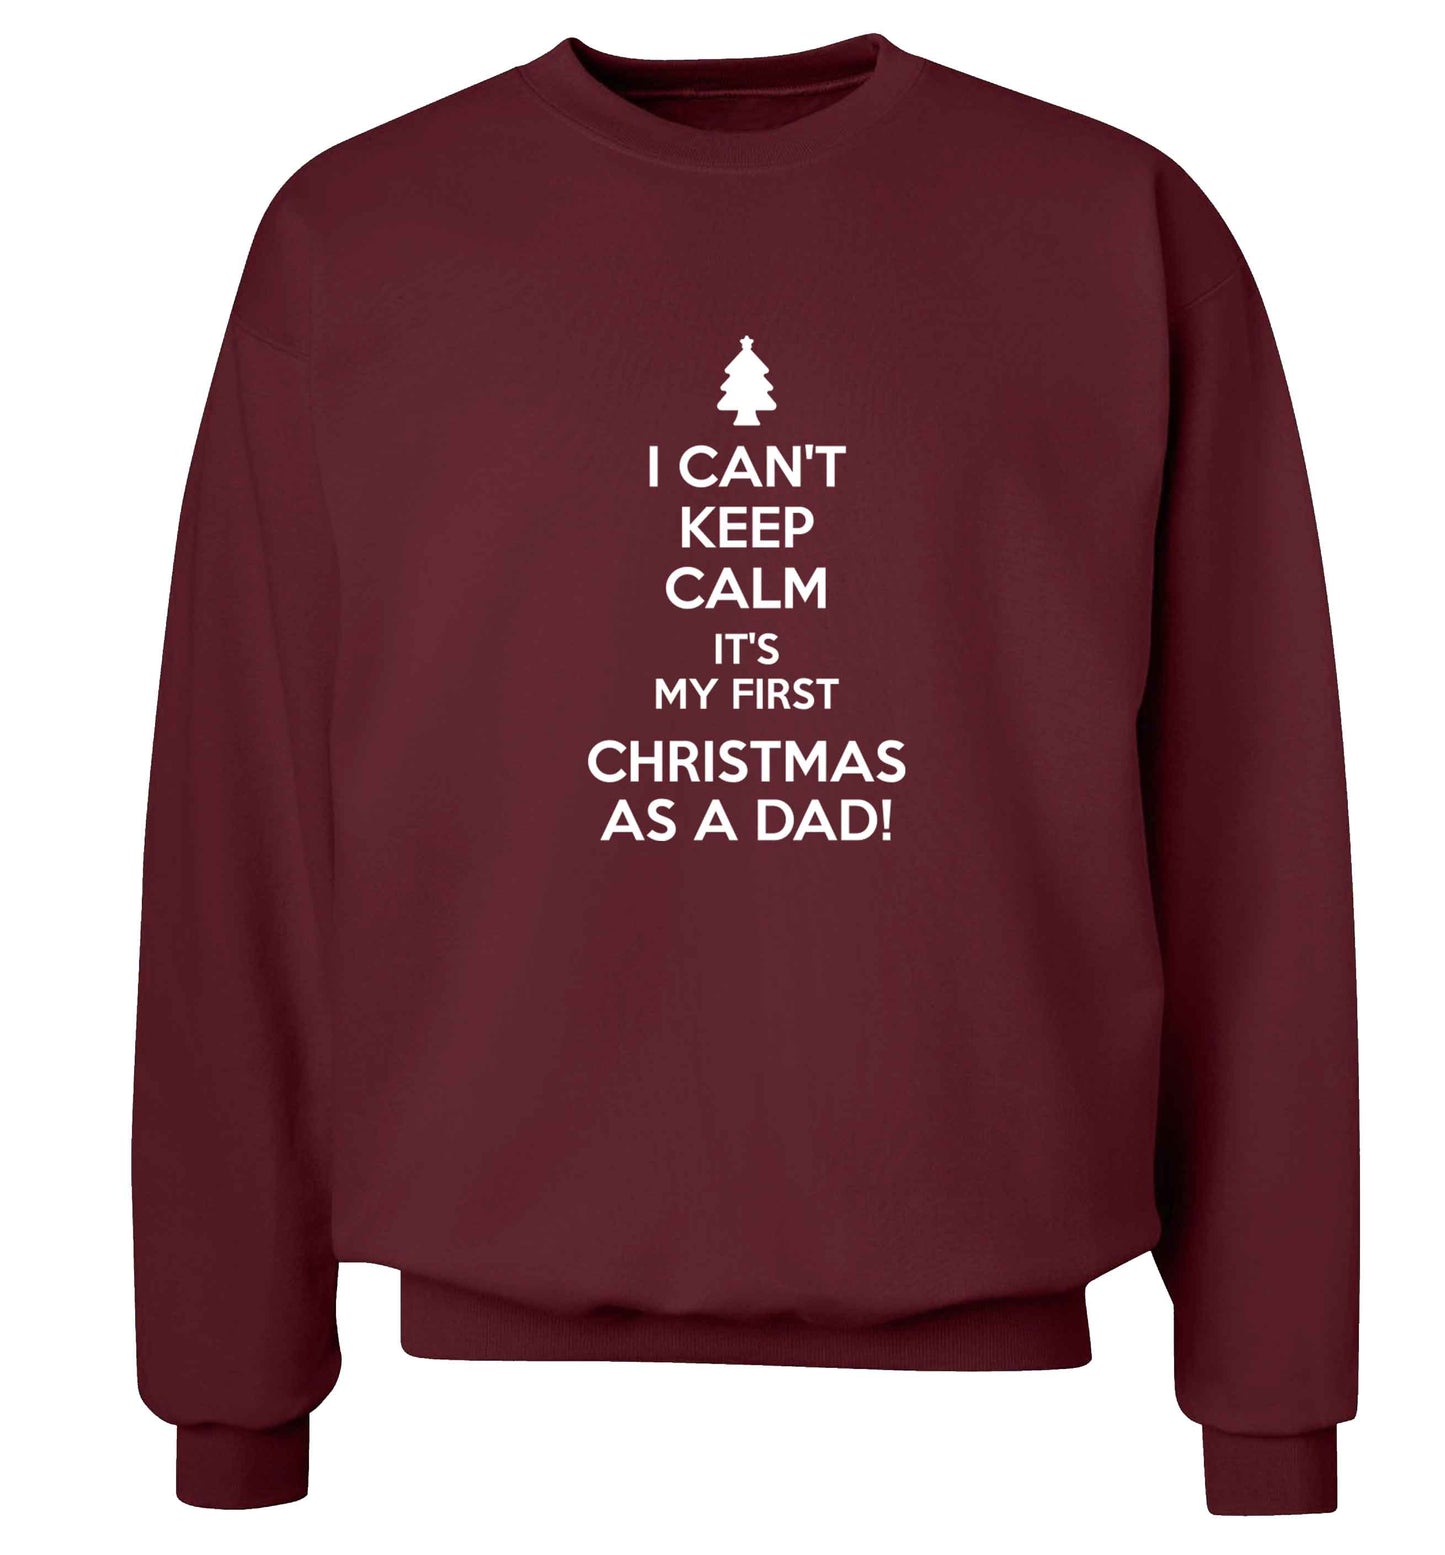 I can't keep calm it's my first Christmas as a dad Adult's unisex maroon Sweater 2XL